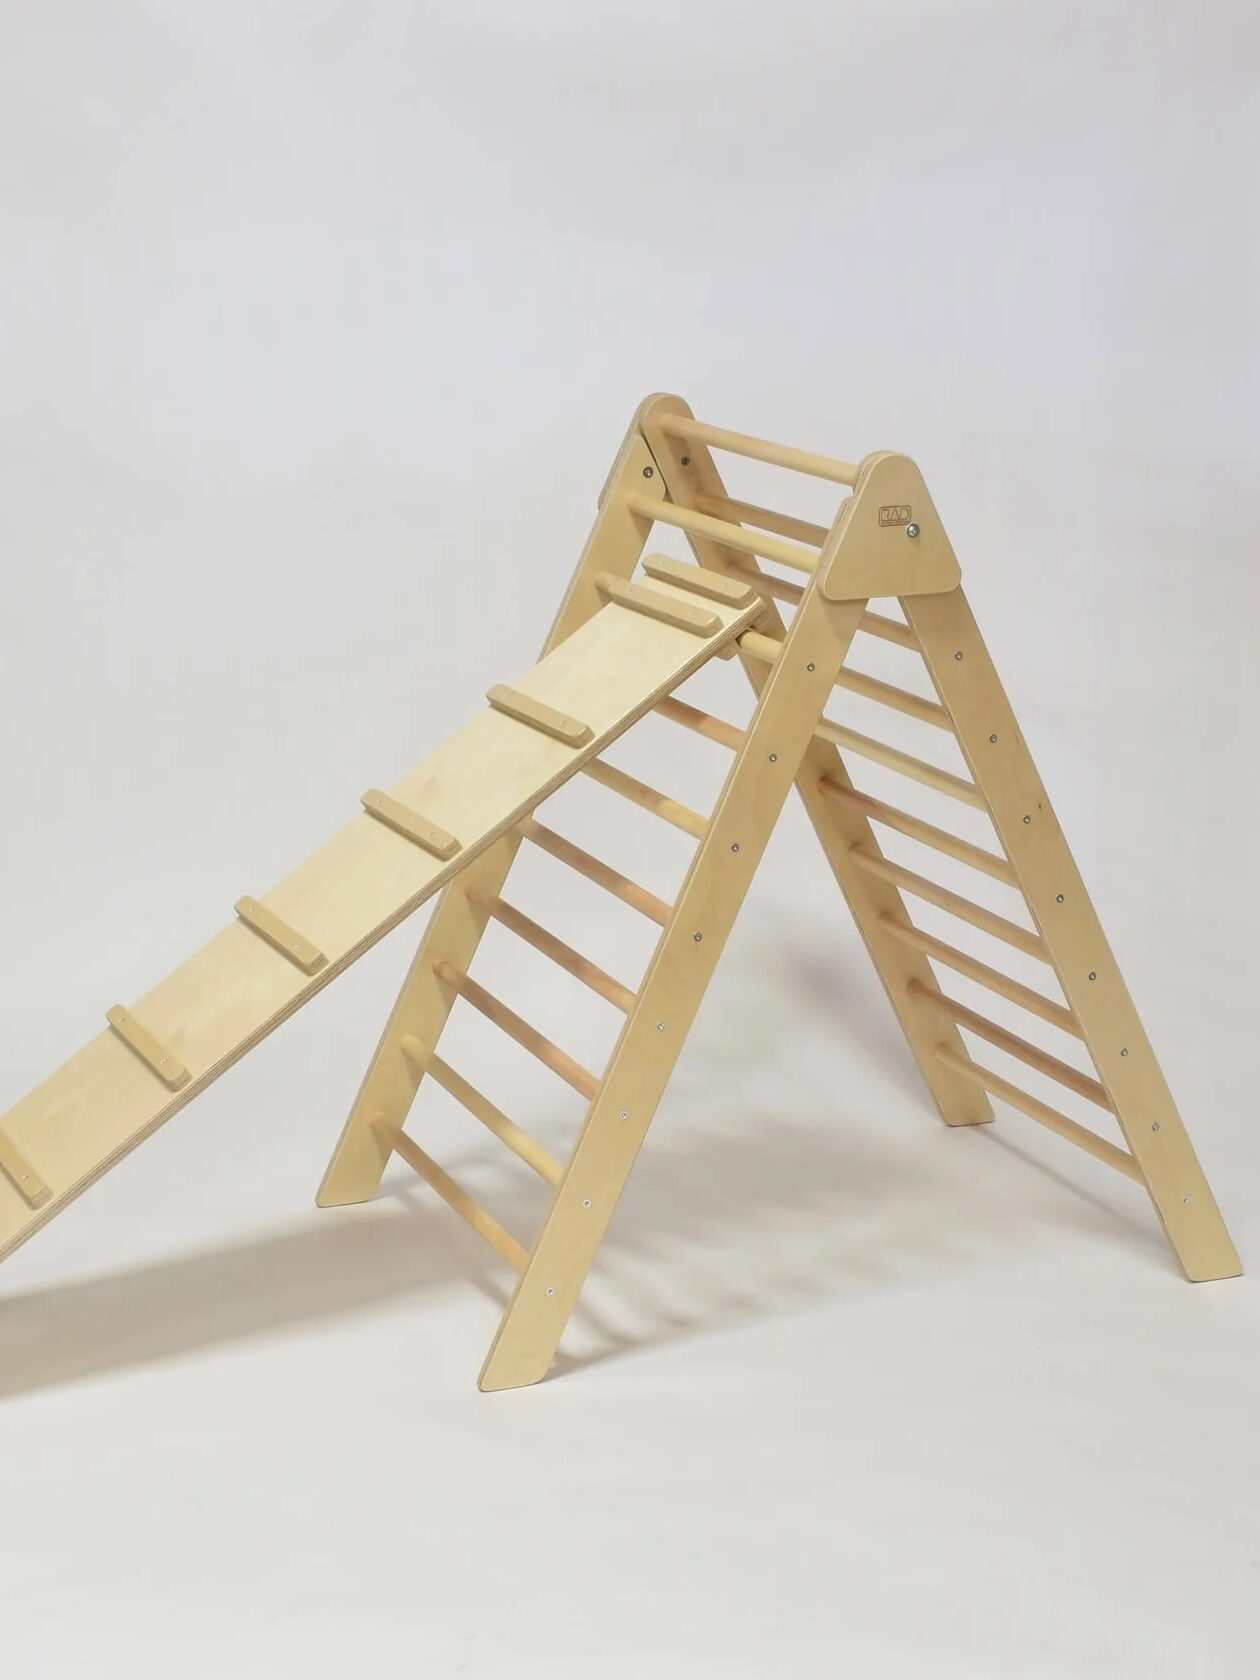 A wooden climbing triangle with an attached ramp is shown against a plain white background.